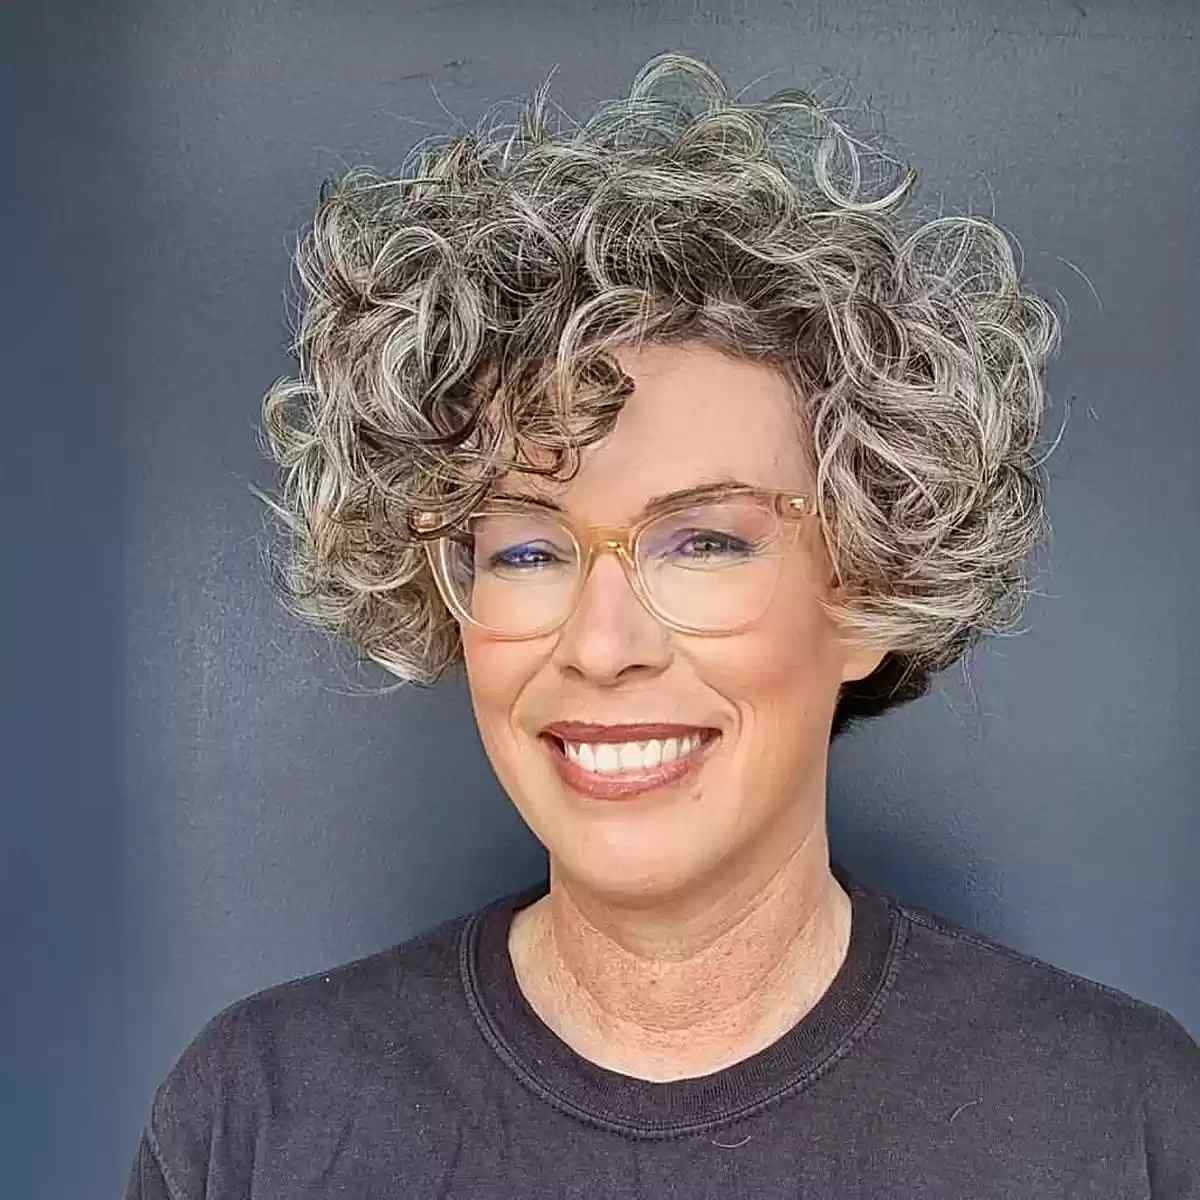 Scissor-Over-Comb Short Hair with Bouncy Curls on 50-Year-Old Ladies with Glasses